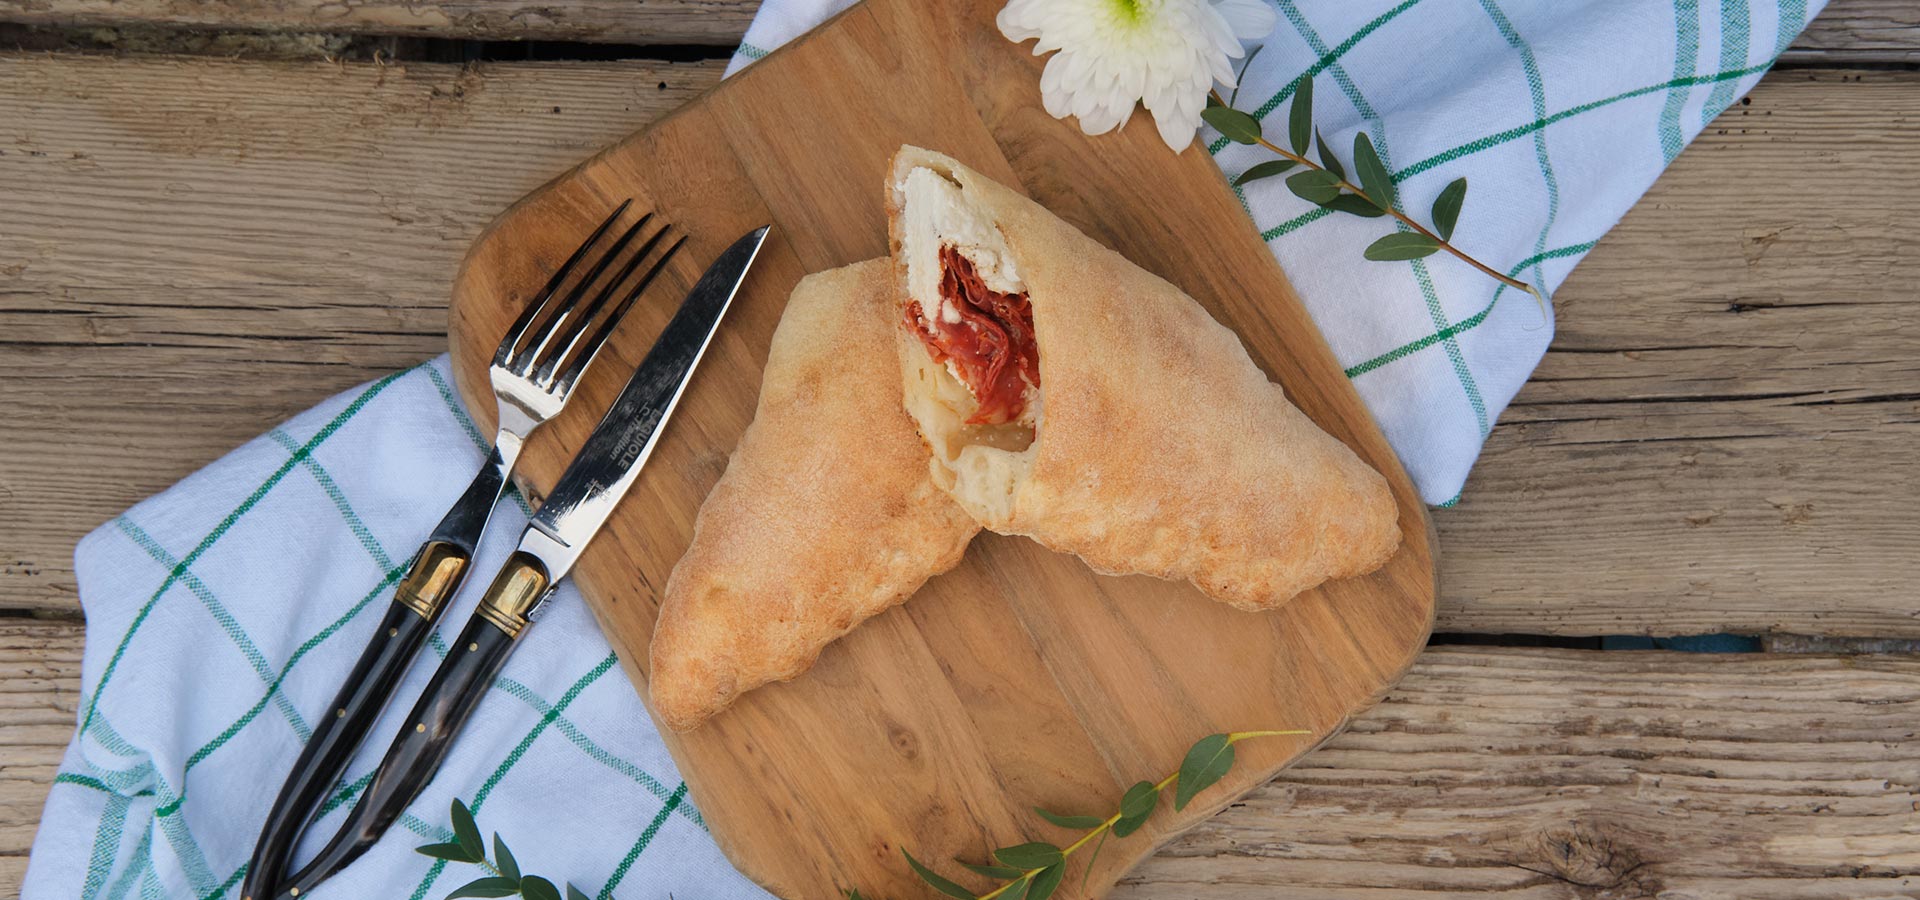 Featured image for “Calzone”